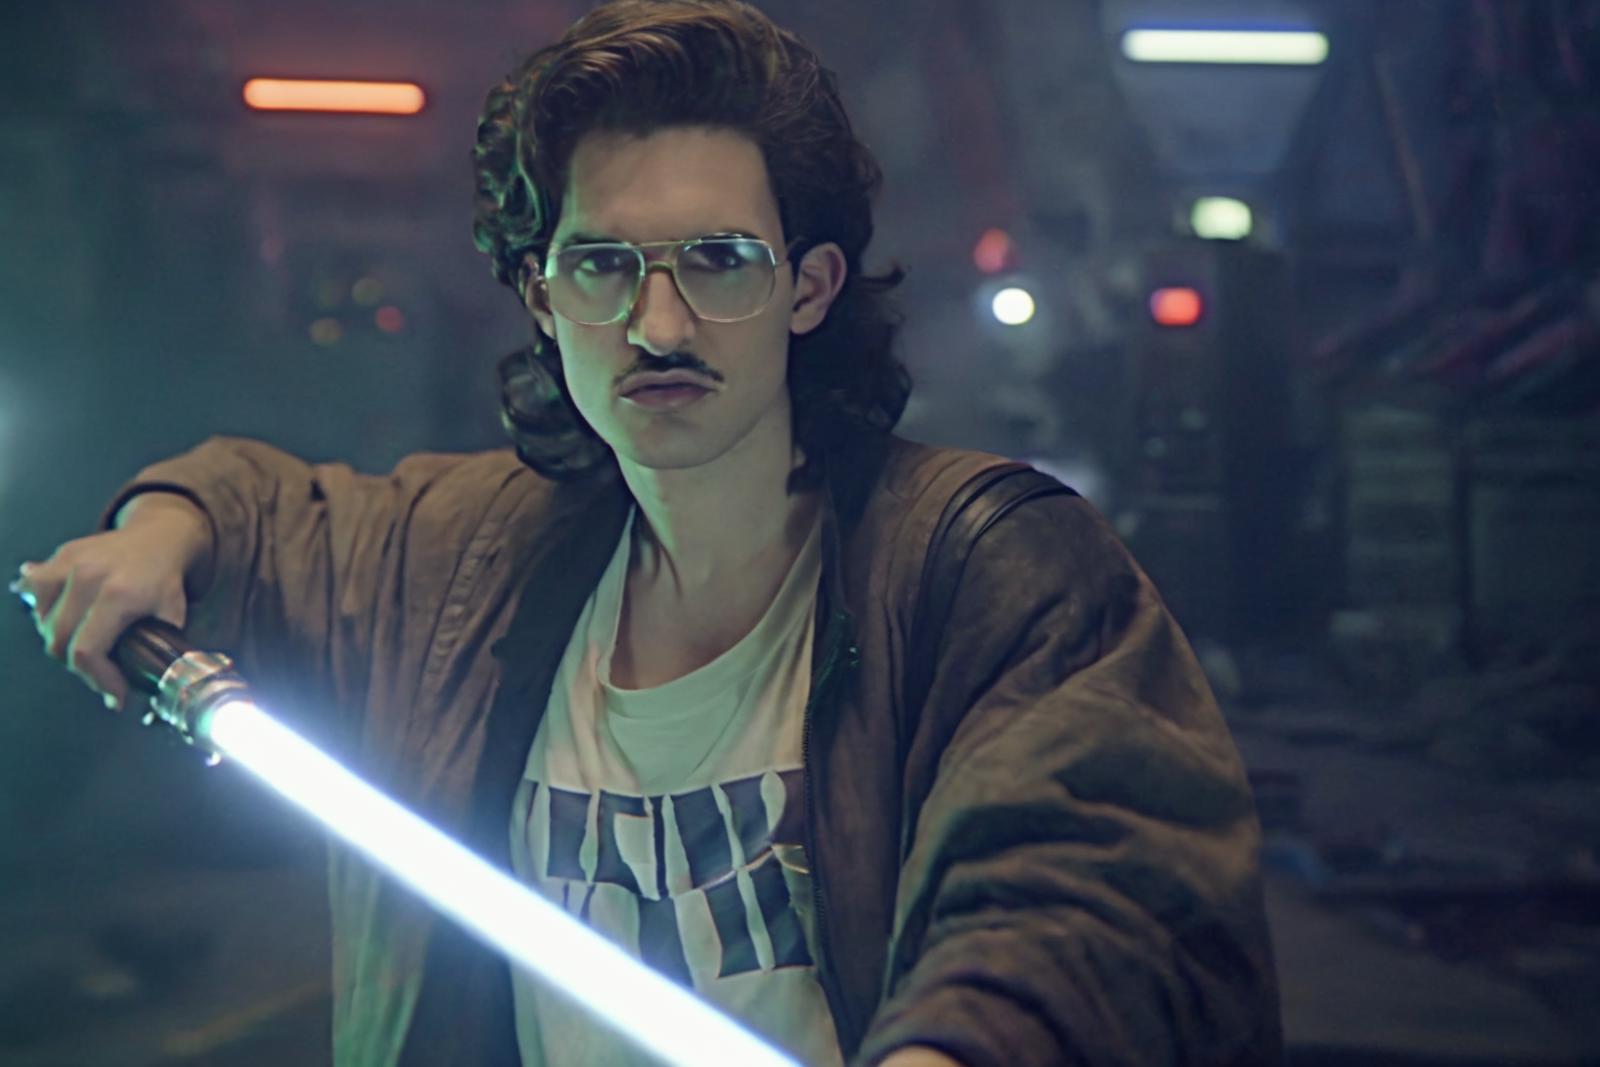 Man with a mustache and glasses holding a blue light saber.